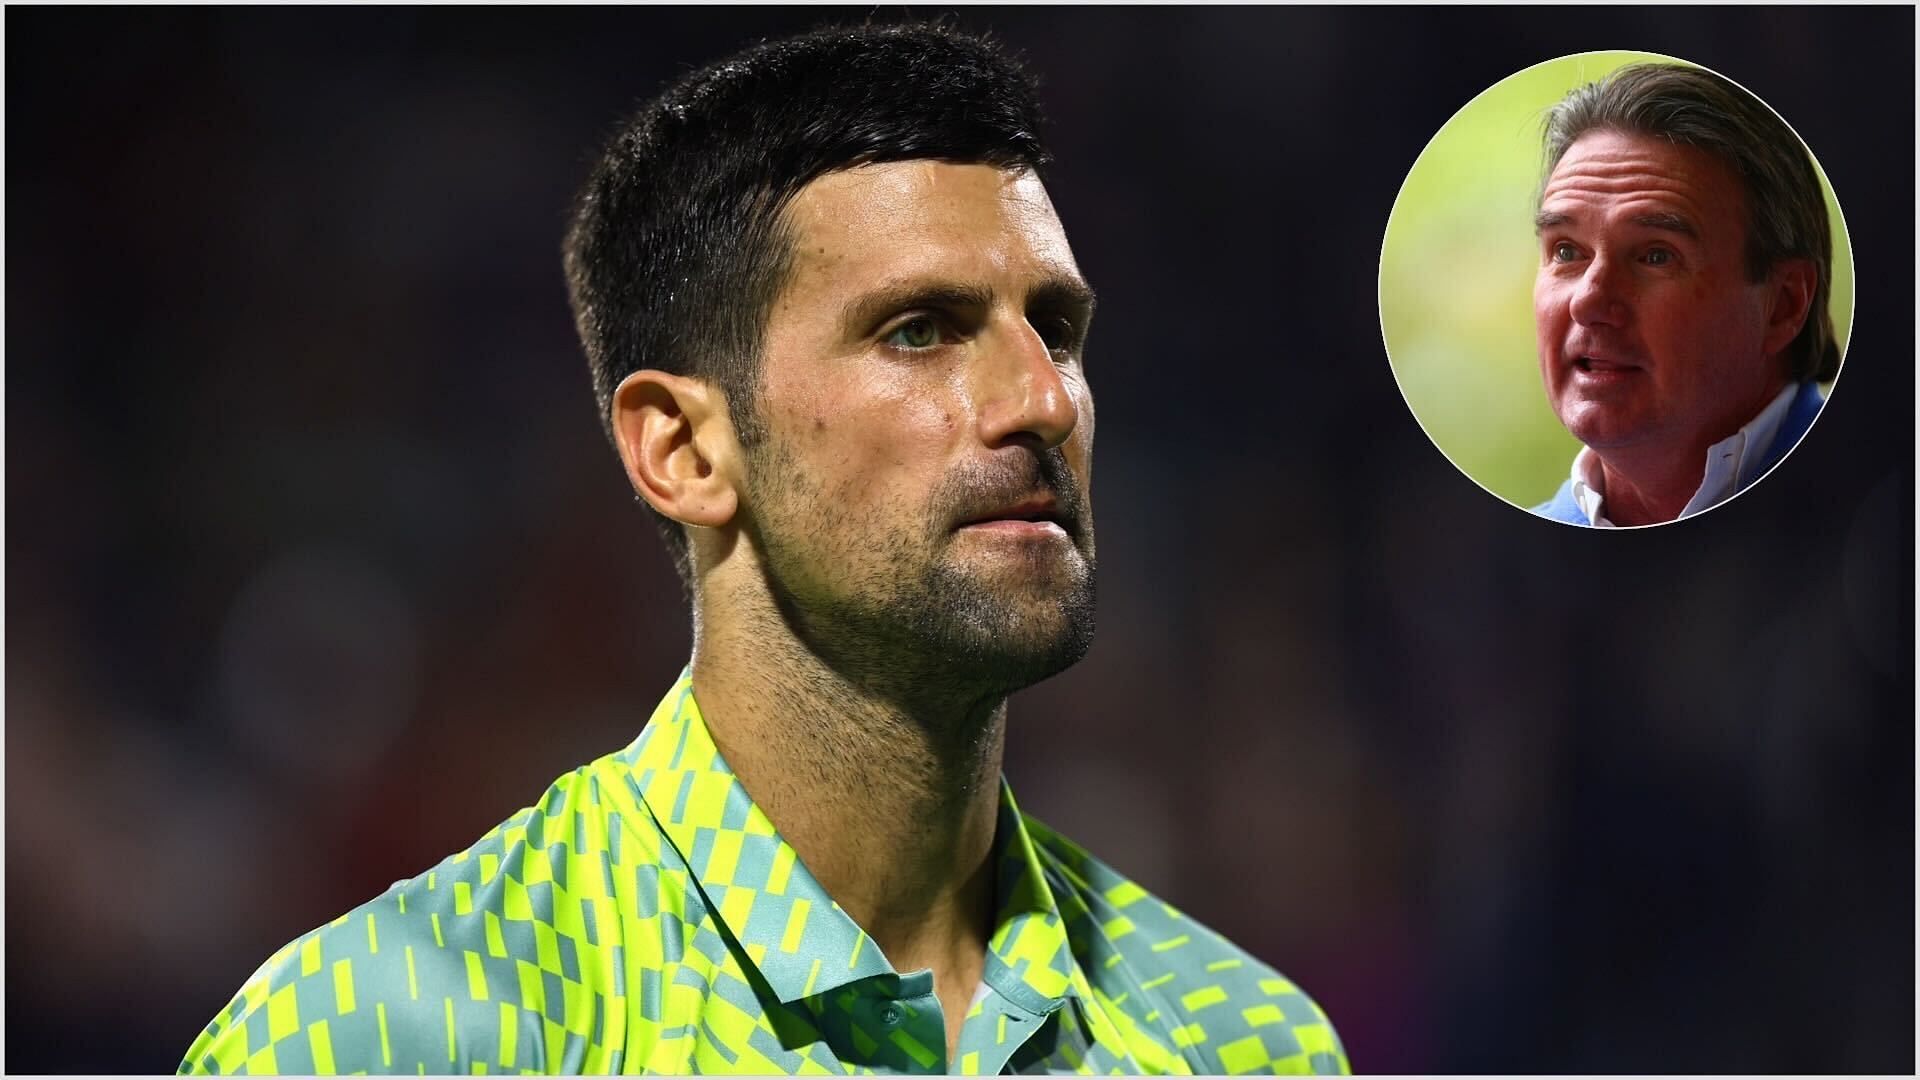 Jimmy Connors has urged Novak Djokovic not to get discouraged by bad form or injury troubles.